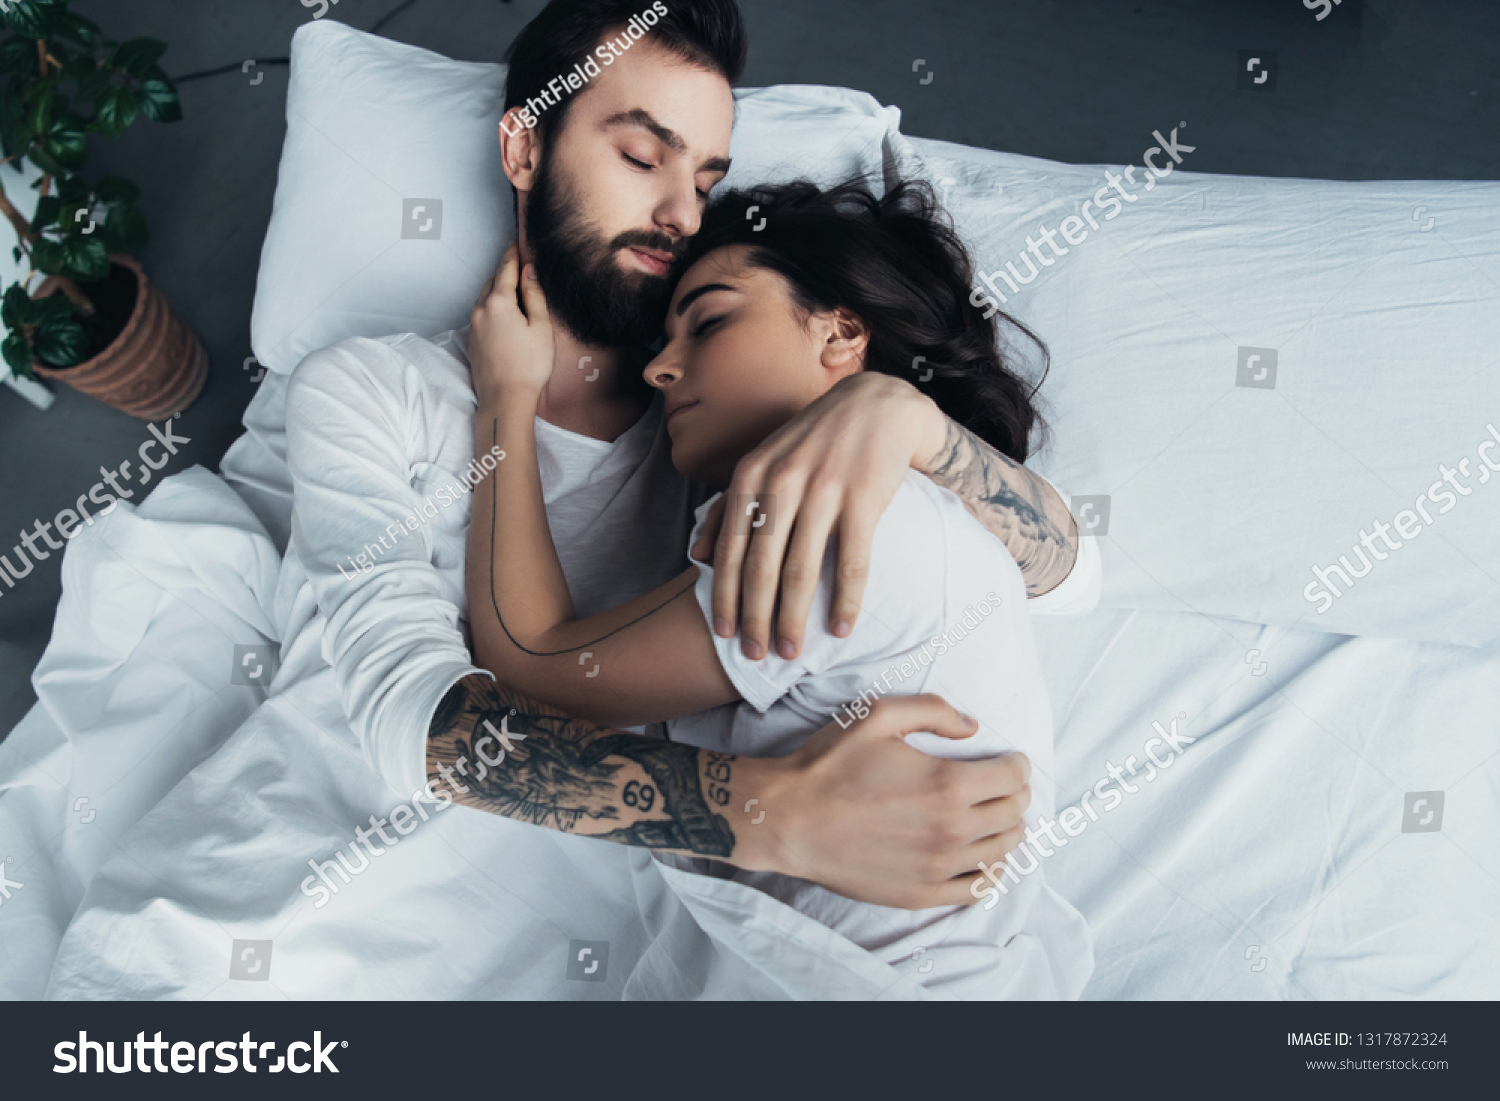 beautiful young tattooed couple embracing while sleeping in bed #1317872324